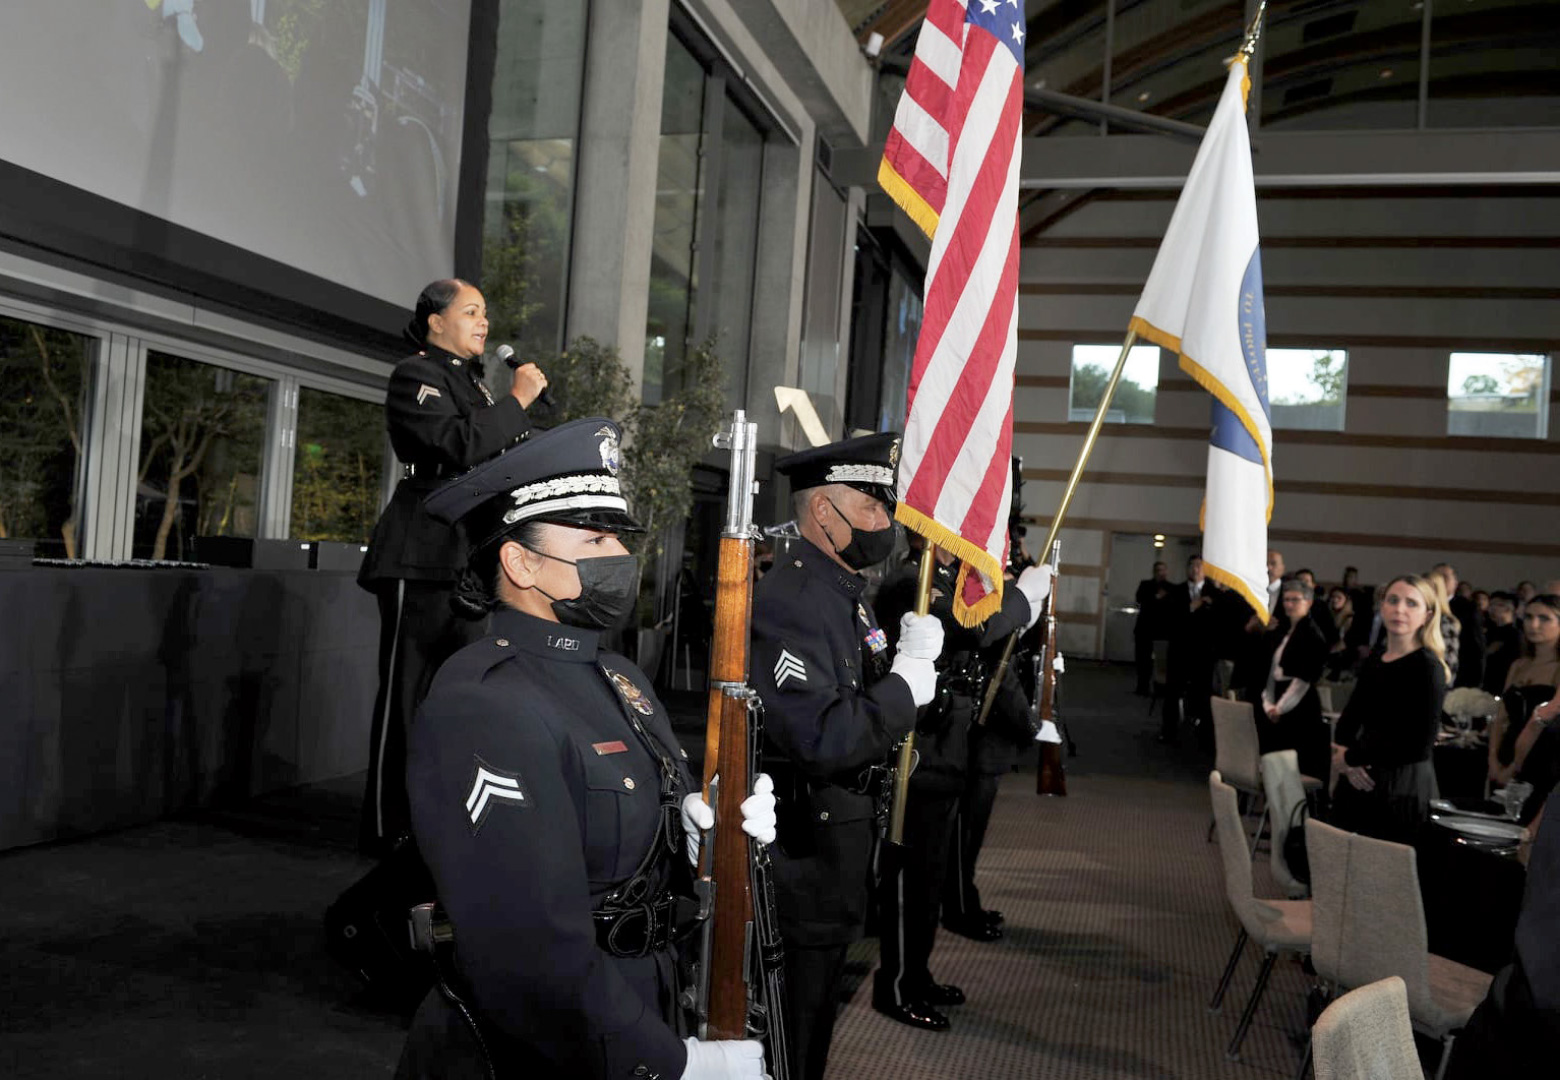 skirball-reopens-reserve-officer-of-the-year-twice-a-citizen-gala-31-officer-rosalind-curry-singing-the-national-anthem